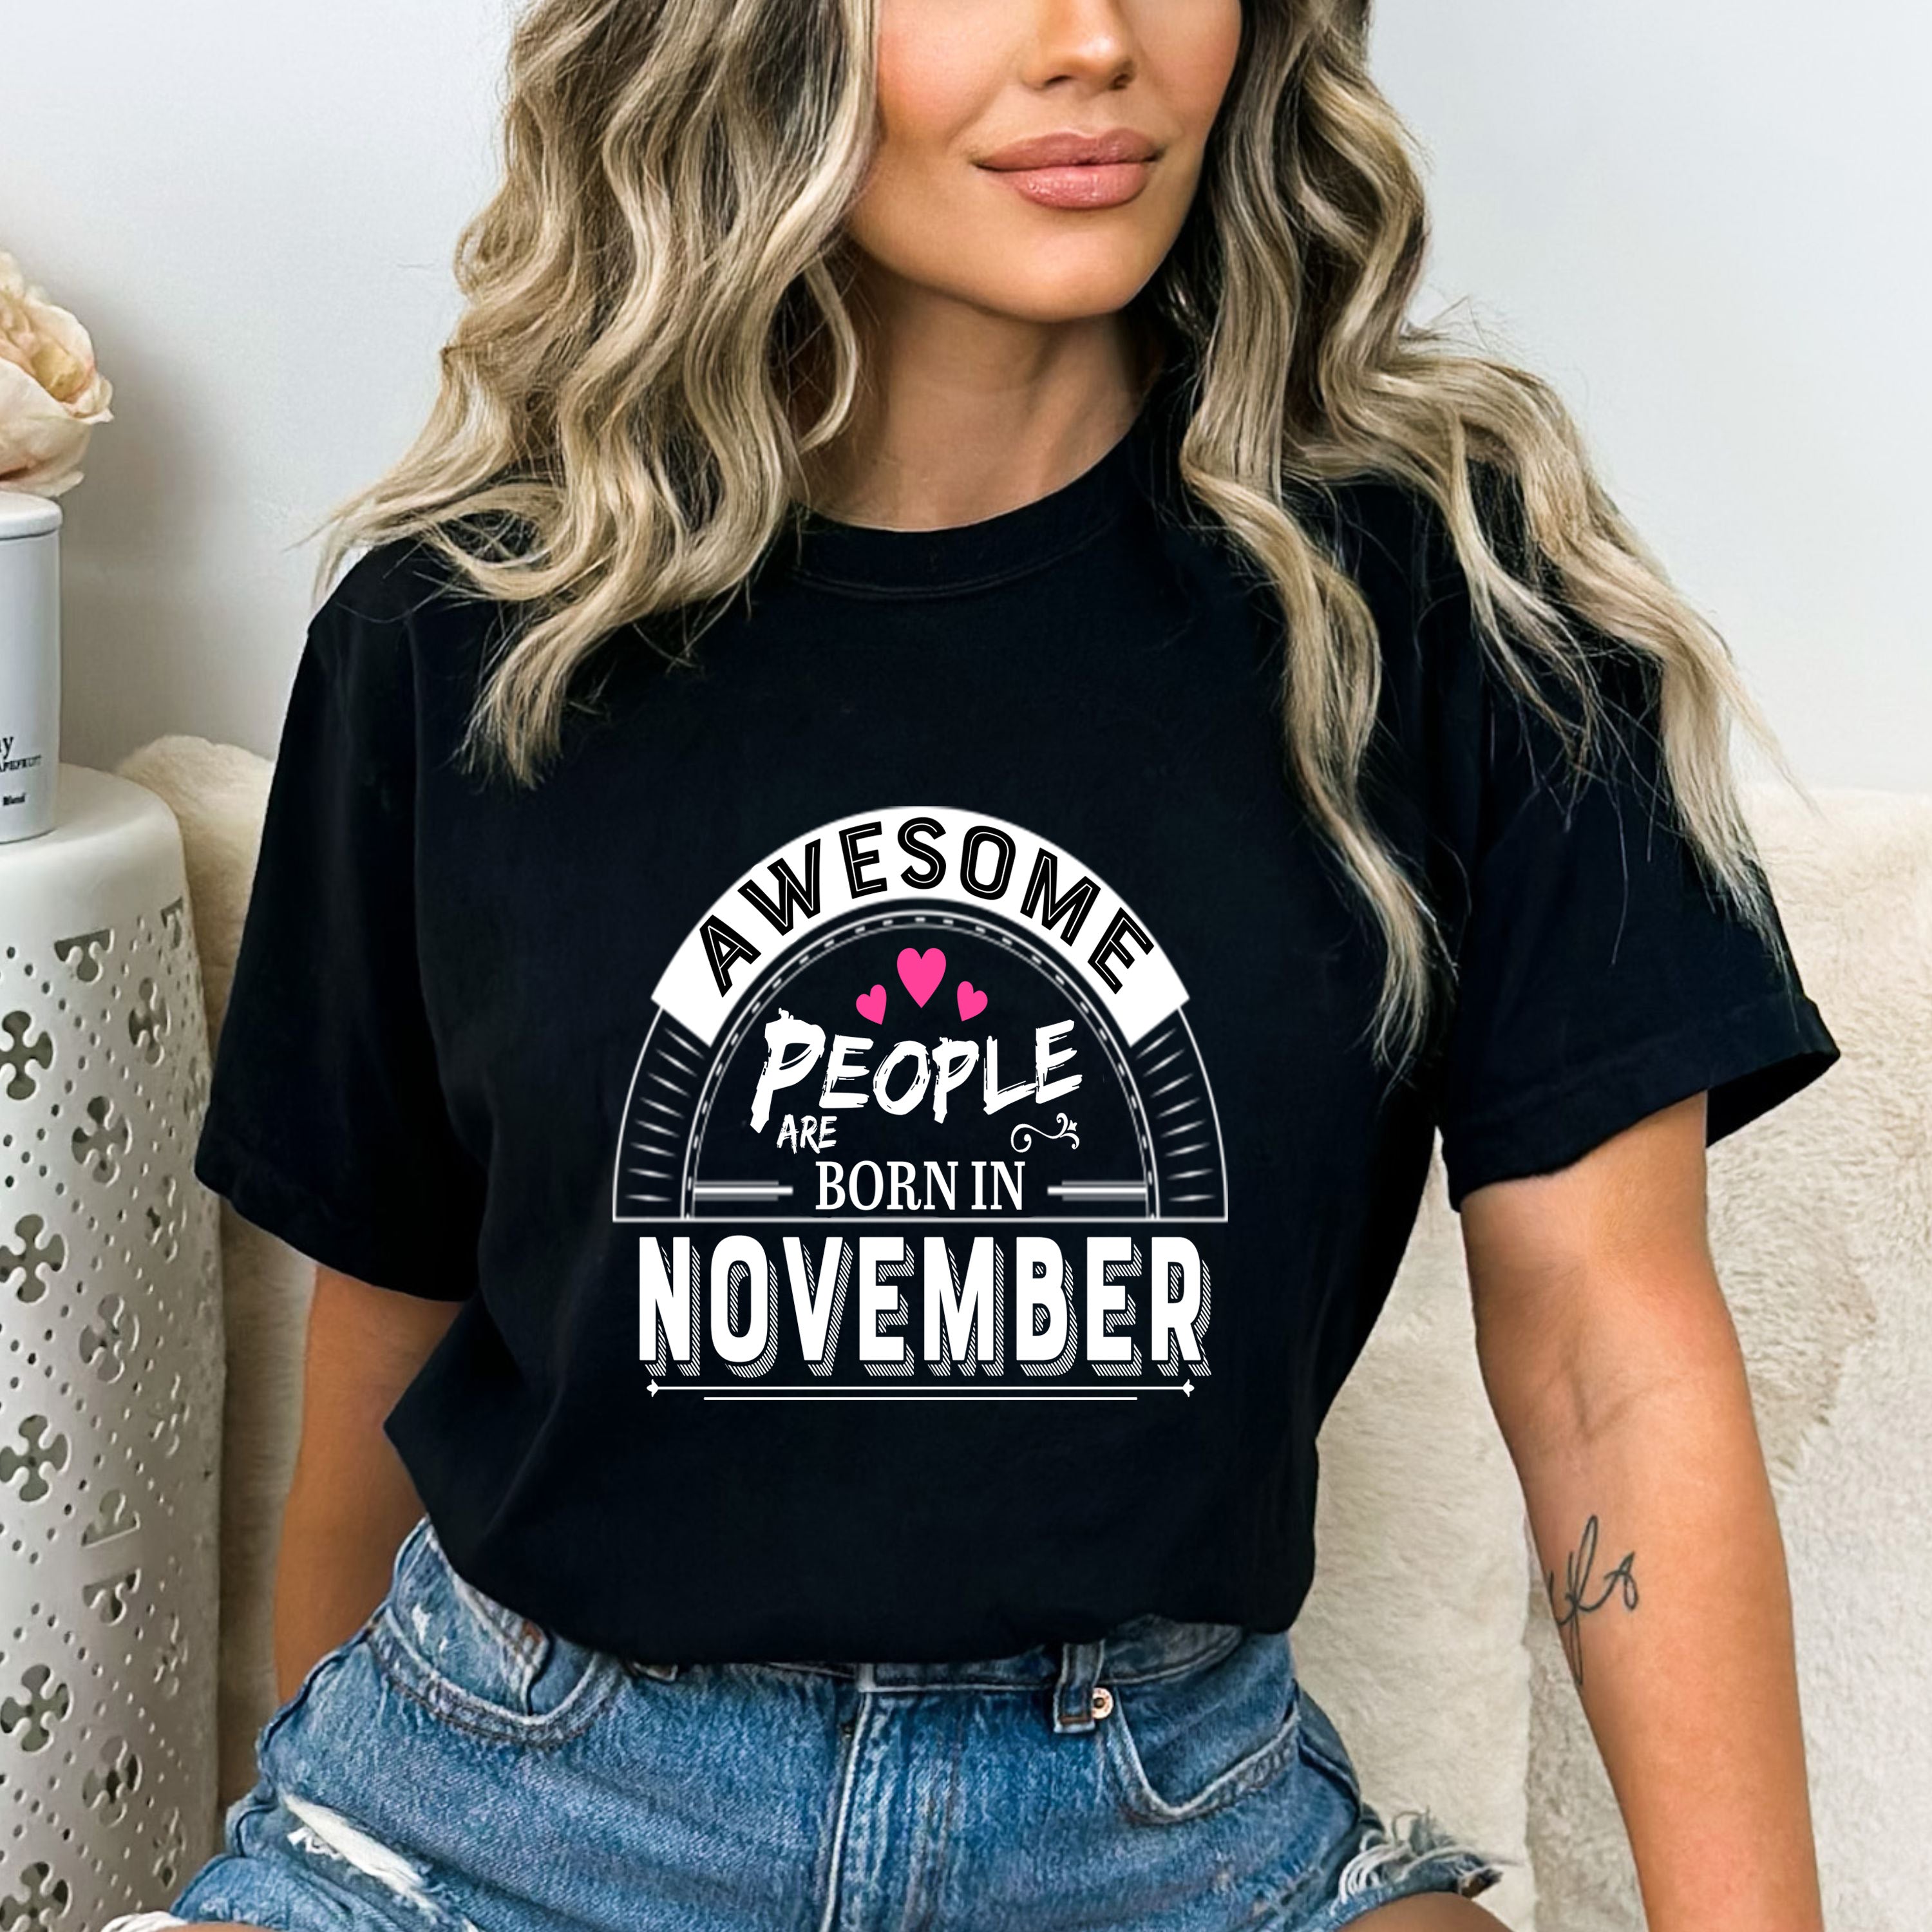 "Awesome People Are Born In November"